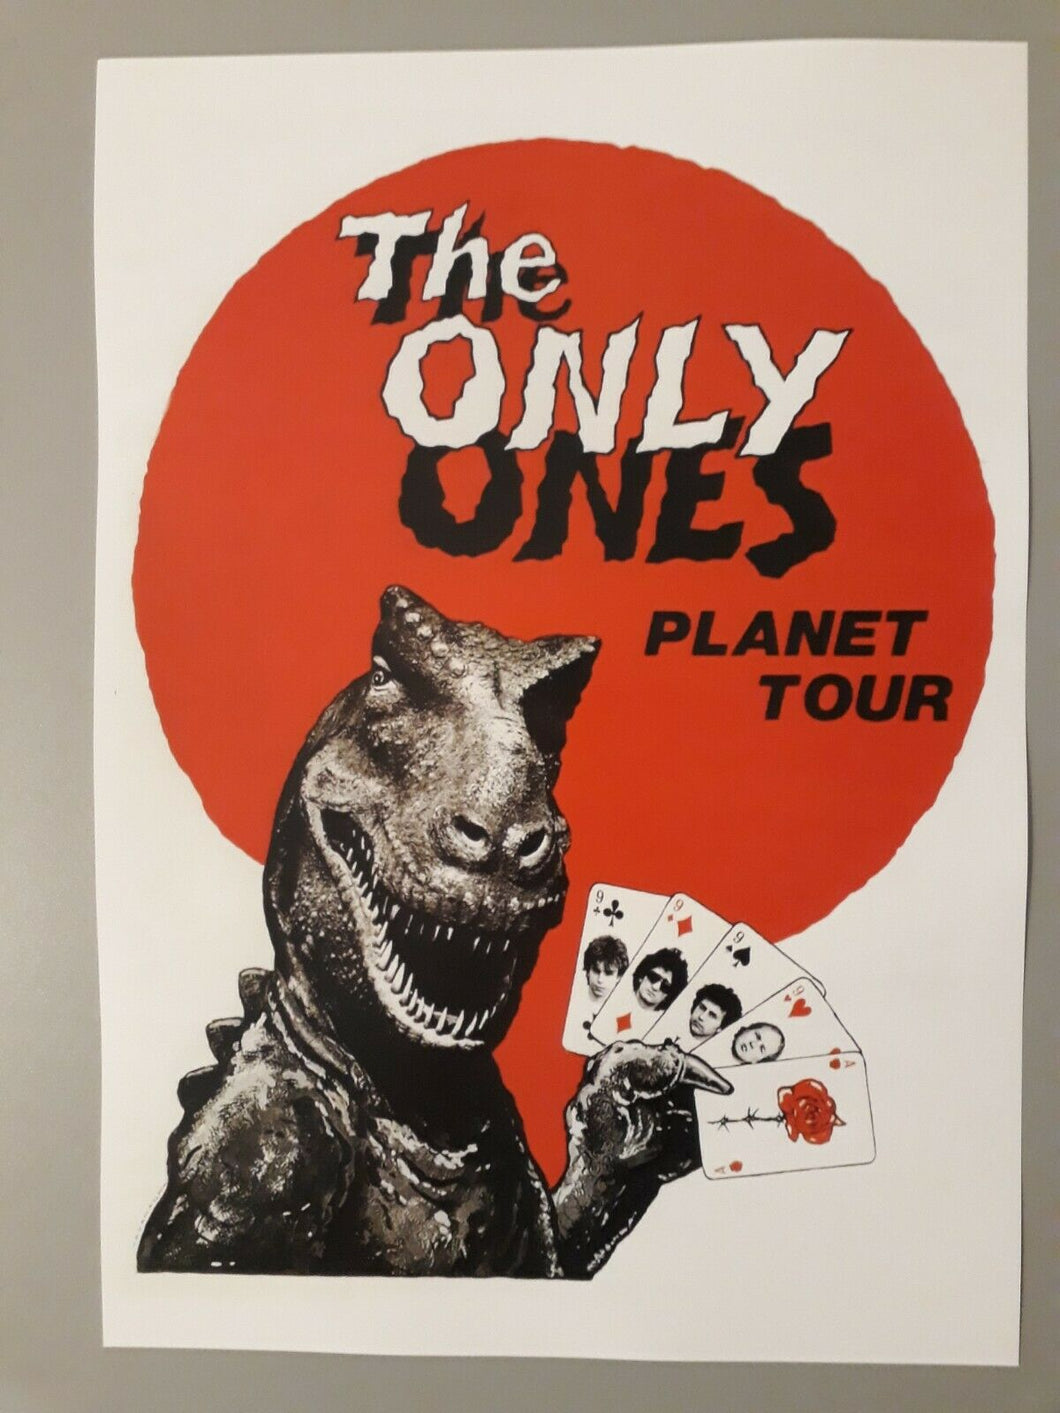 The Only Ones concert tour poster - Planet Tour 1978 promotional A3 size reprint - Original Music and Movie Posters for sale from Bamalama - Online Poster Store UK London